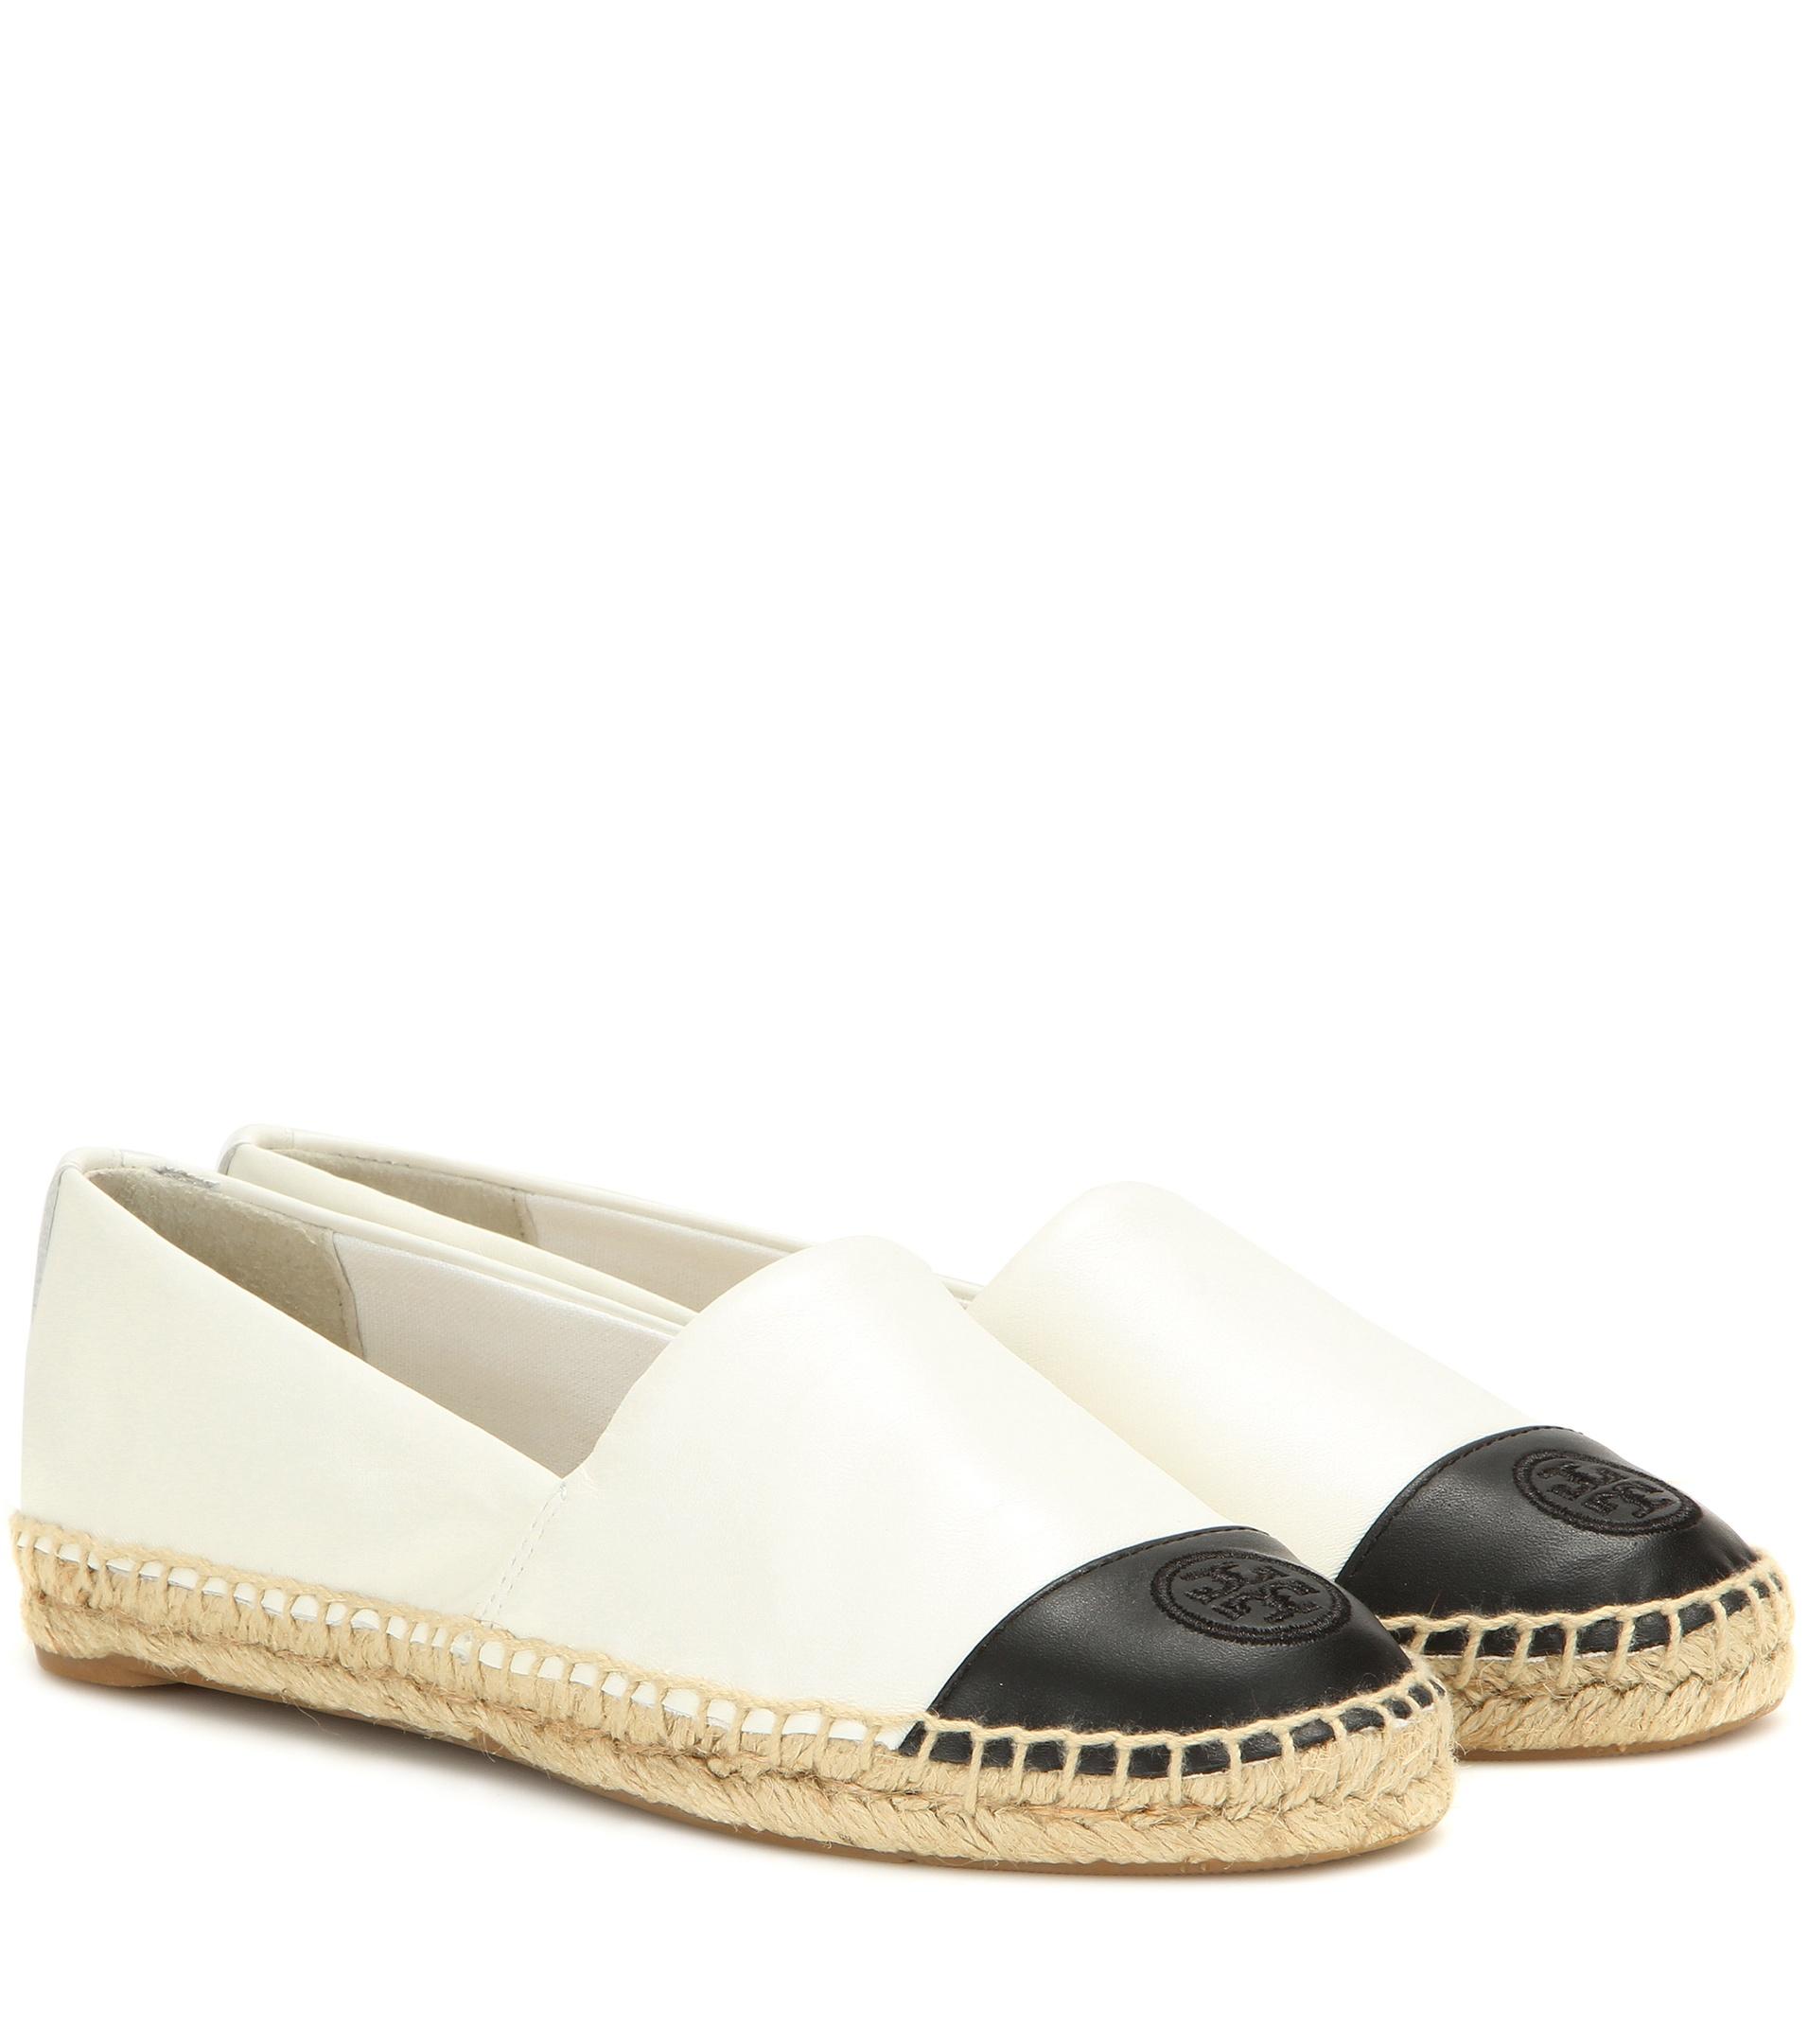 Tory burch Leather Espadrilles in White | Lyst